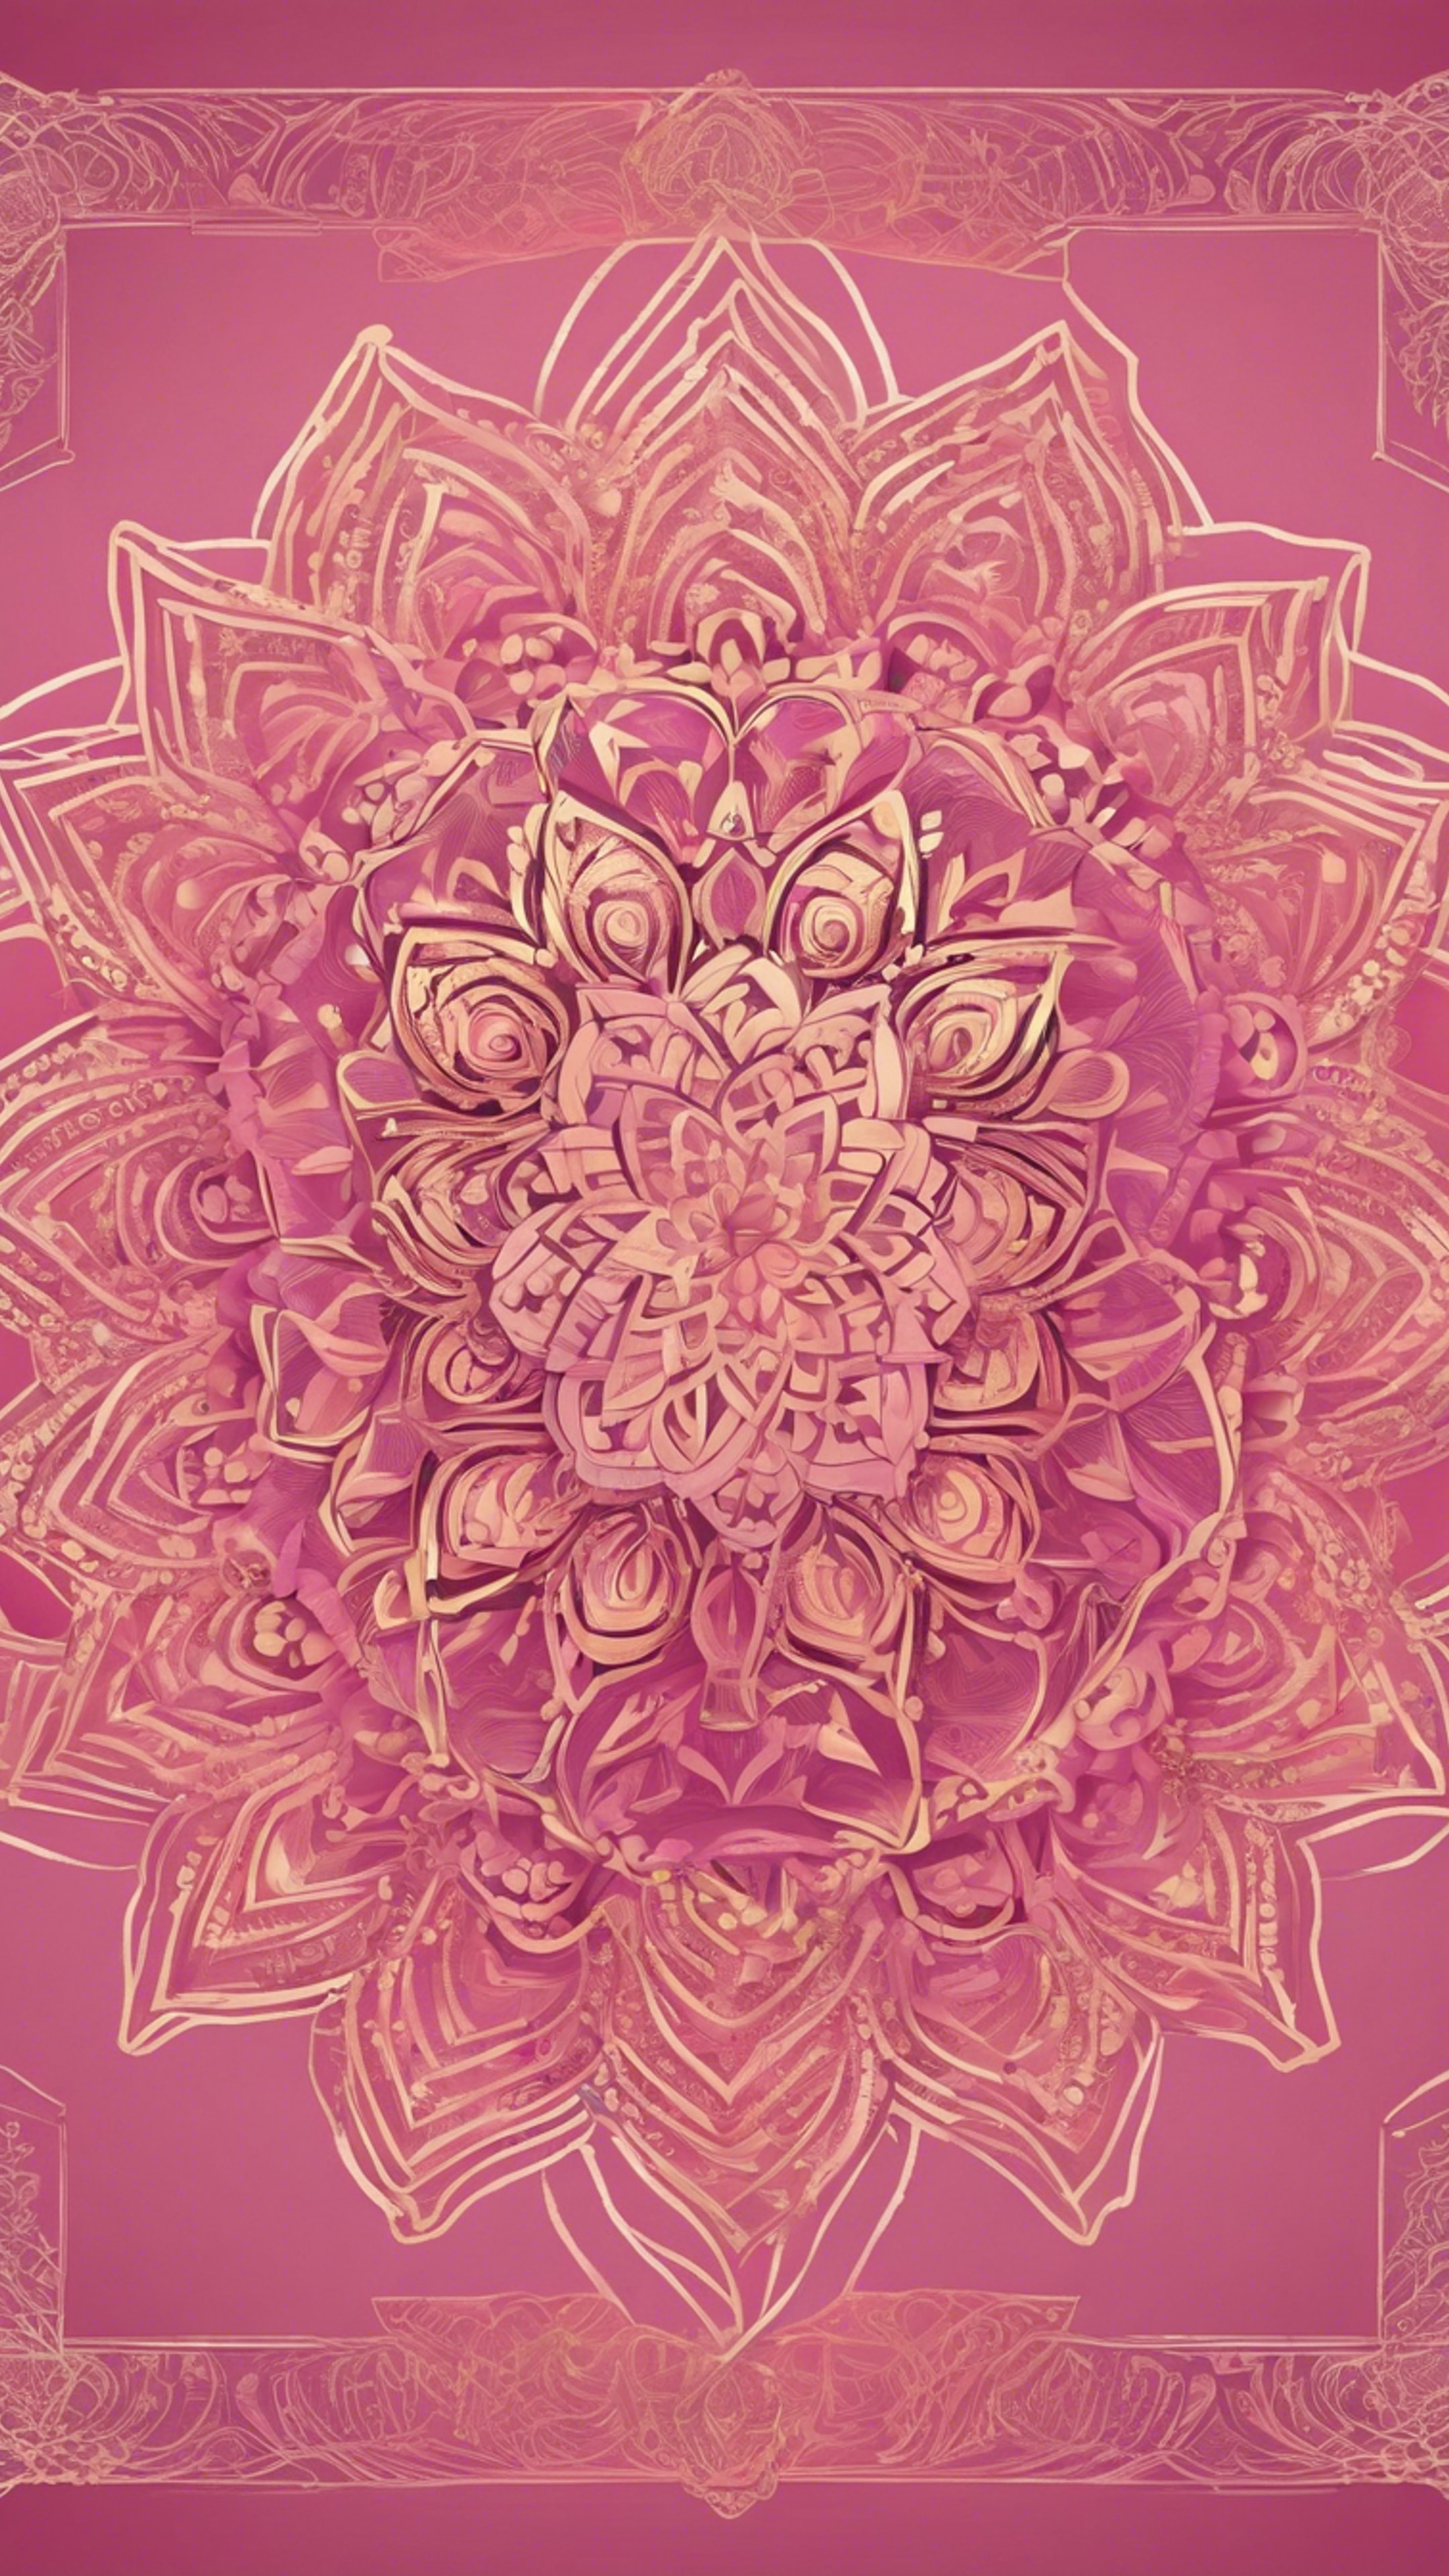 A pink and gold mandala design flourishing with intricate line art and vibrant colors. Tapeta[7f3fcd6ed997428c89d3]